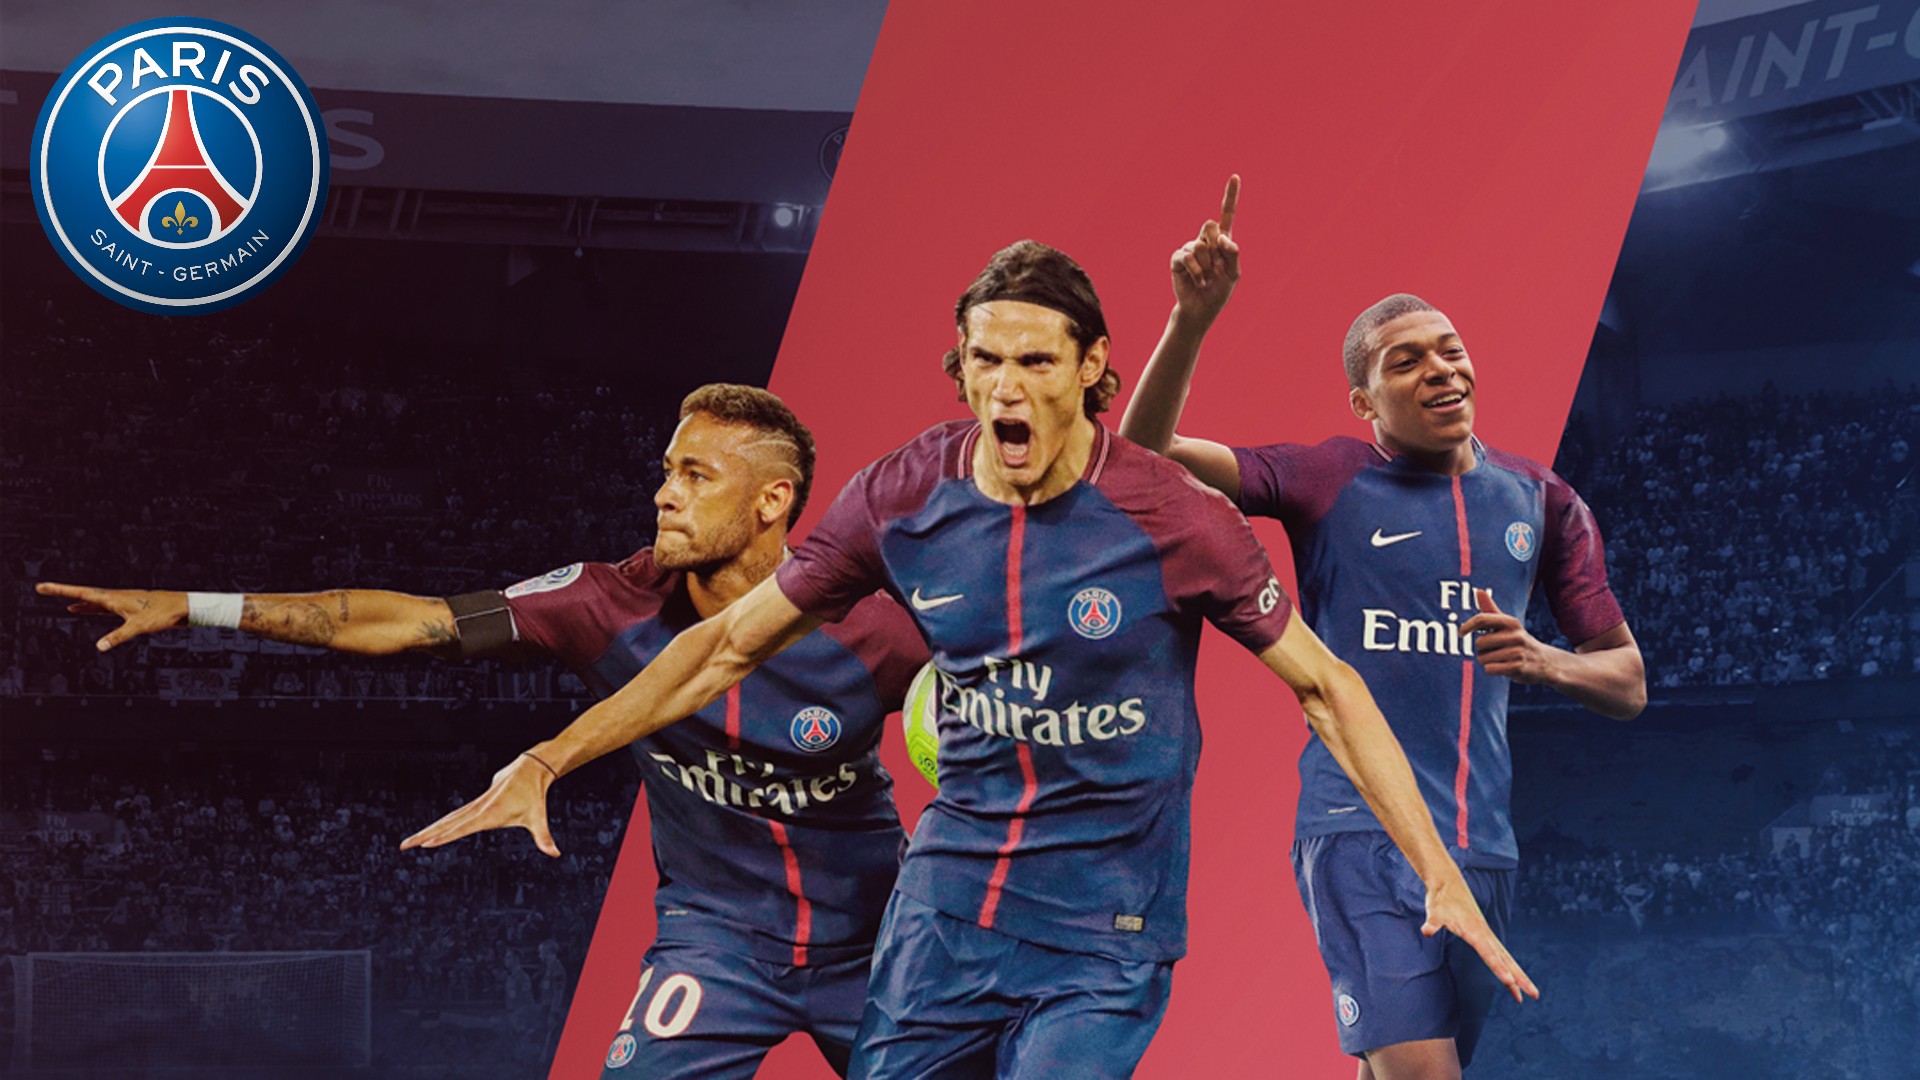 PSG Desktop Wallpaper With Resolution 1920X1080 pixel. You can make this wallpaper for your Mac or Windows Desktop Background, iPhone, Android or Tablet and another Smartphone device for free